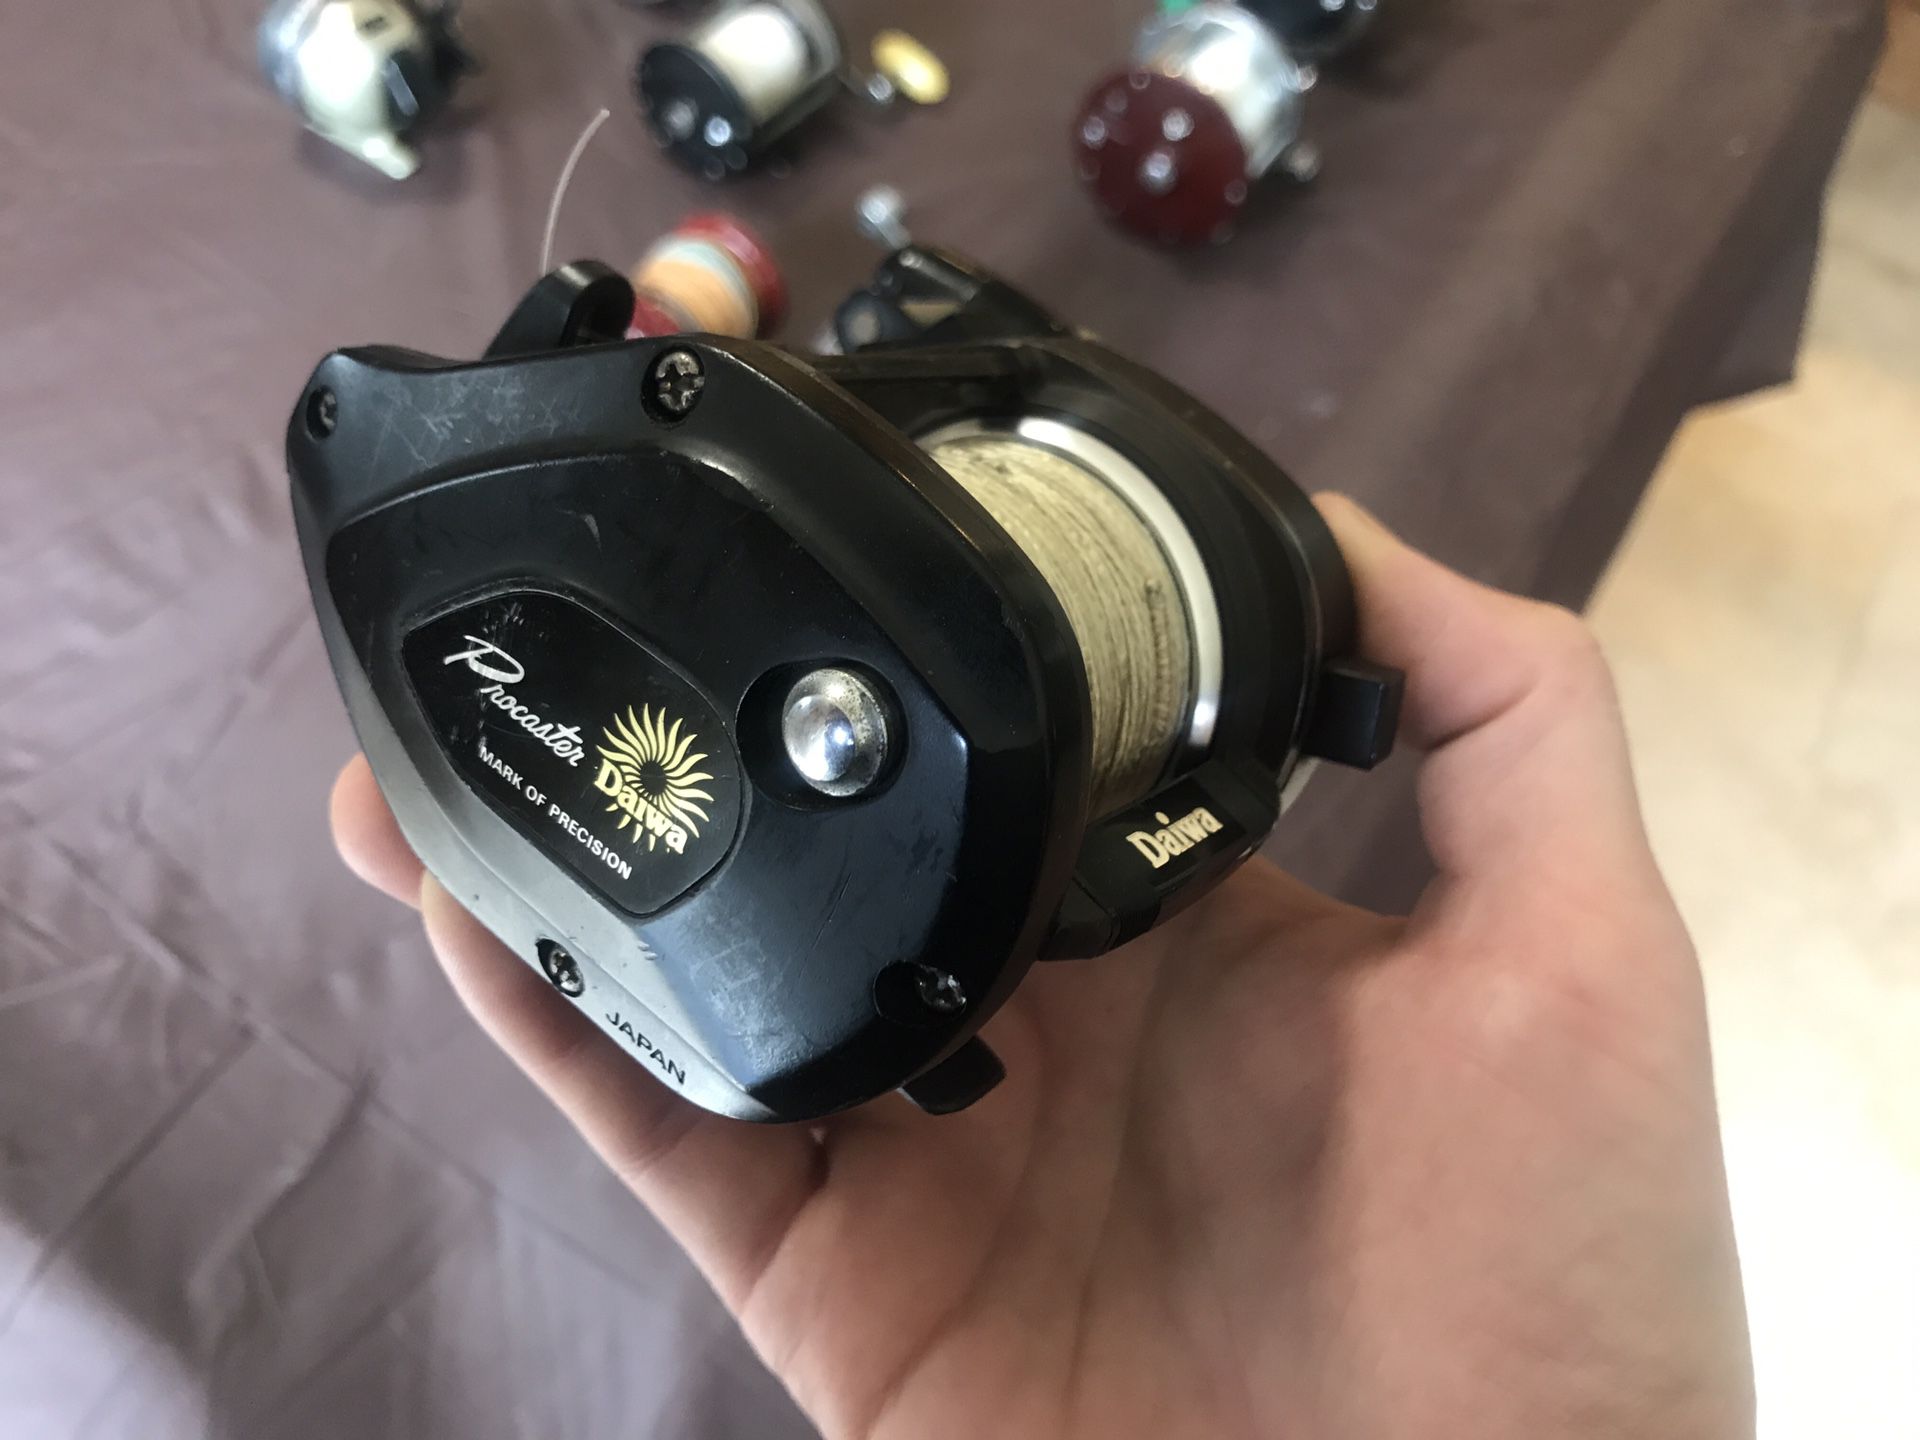 Vintage Daiwa pro caster fishing reel for Sale in San Clemente, CA - OfferUp